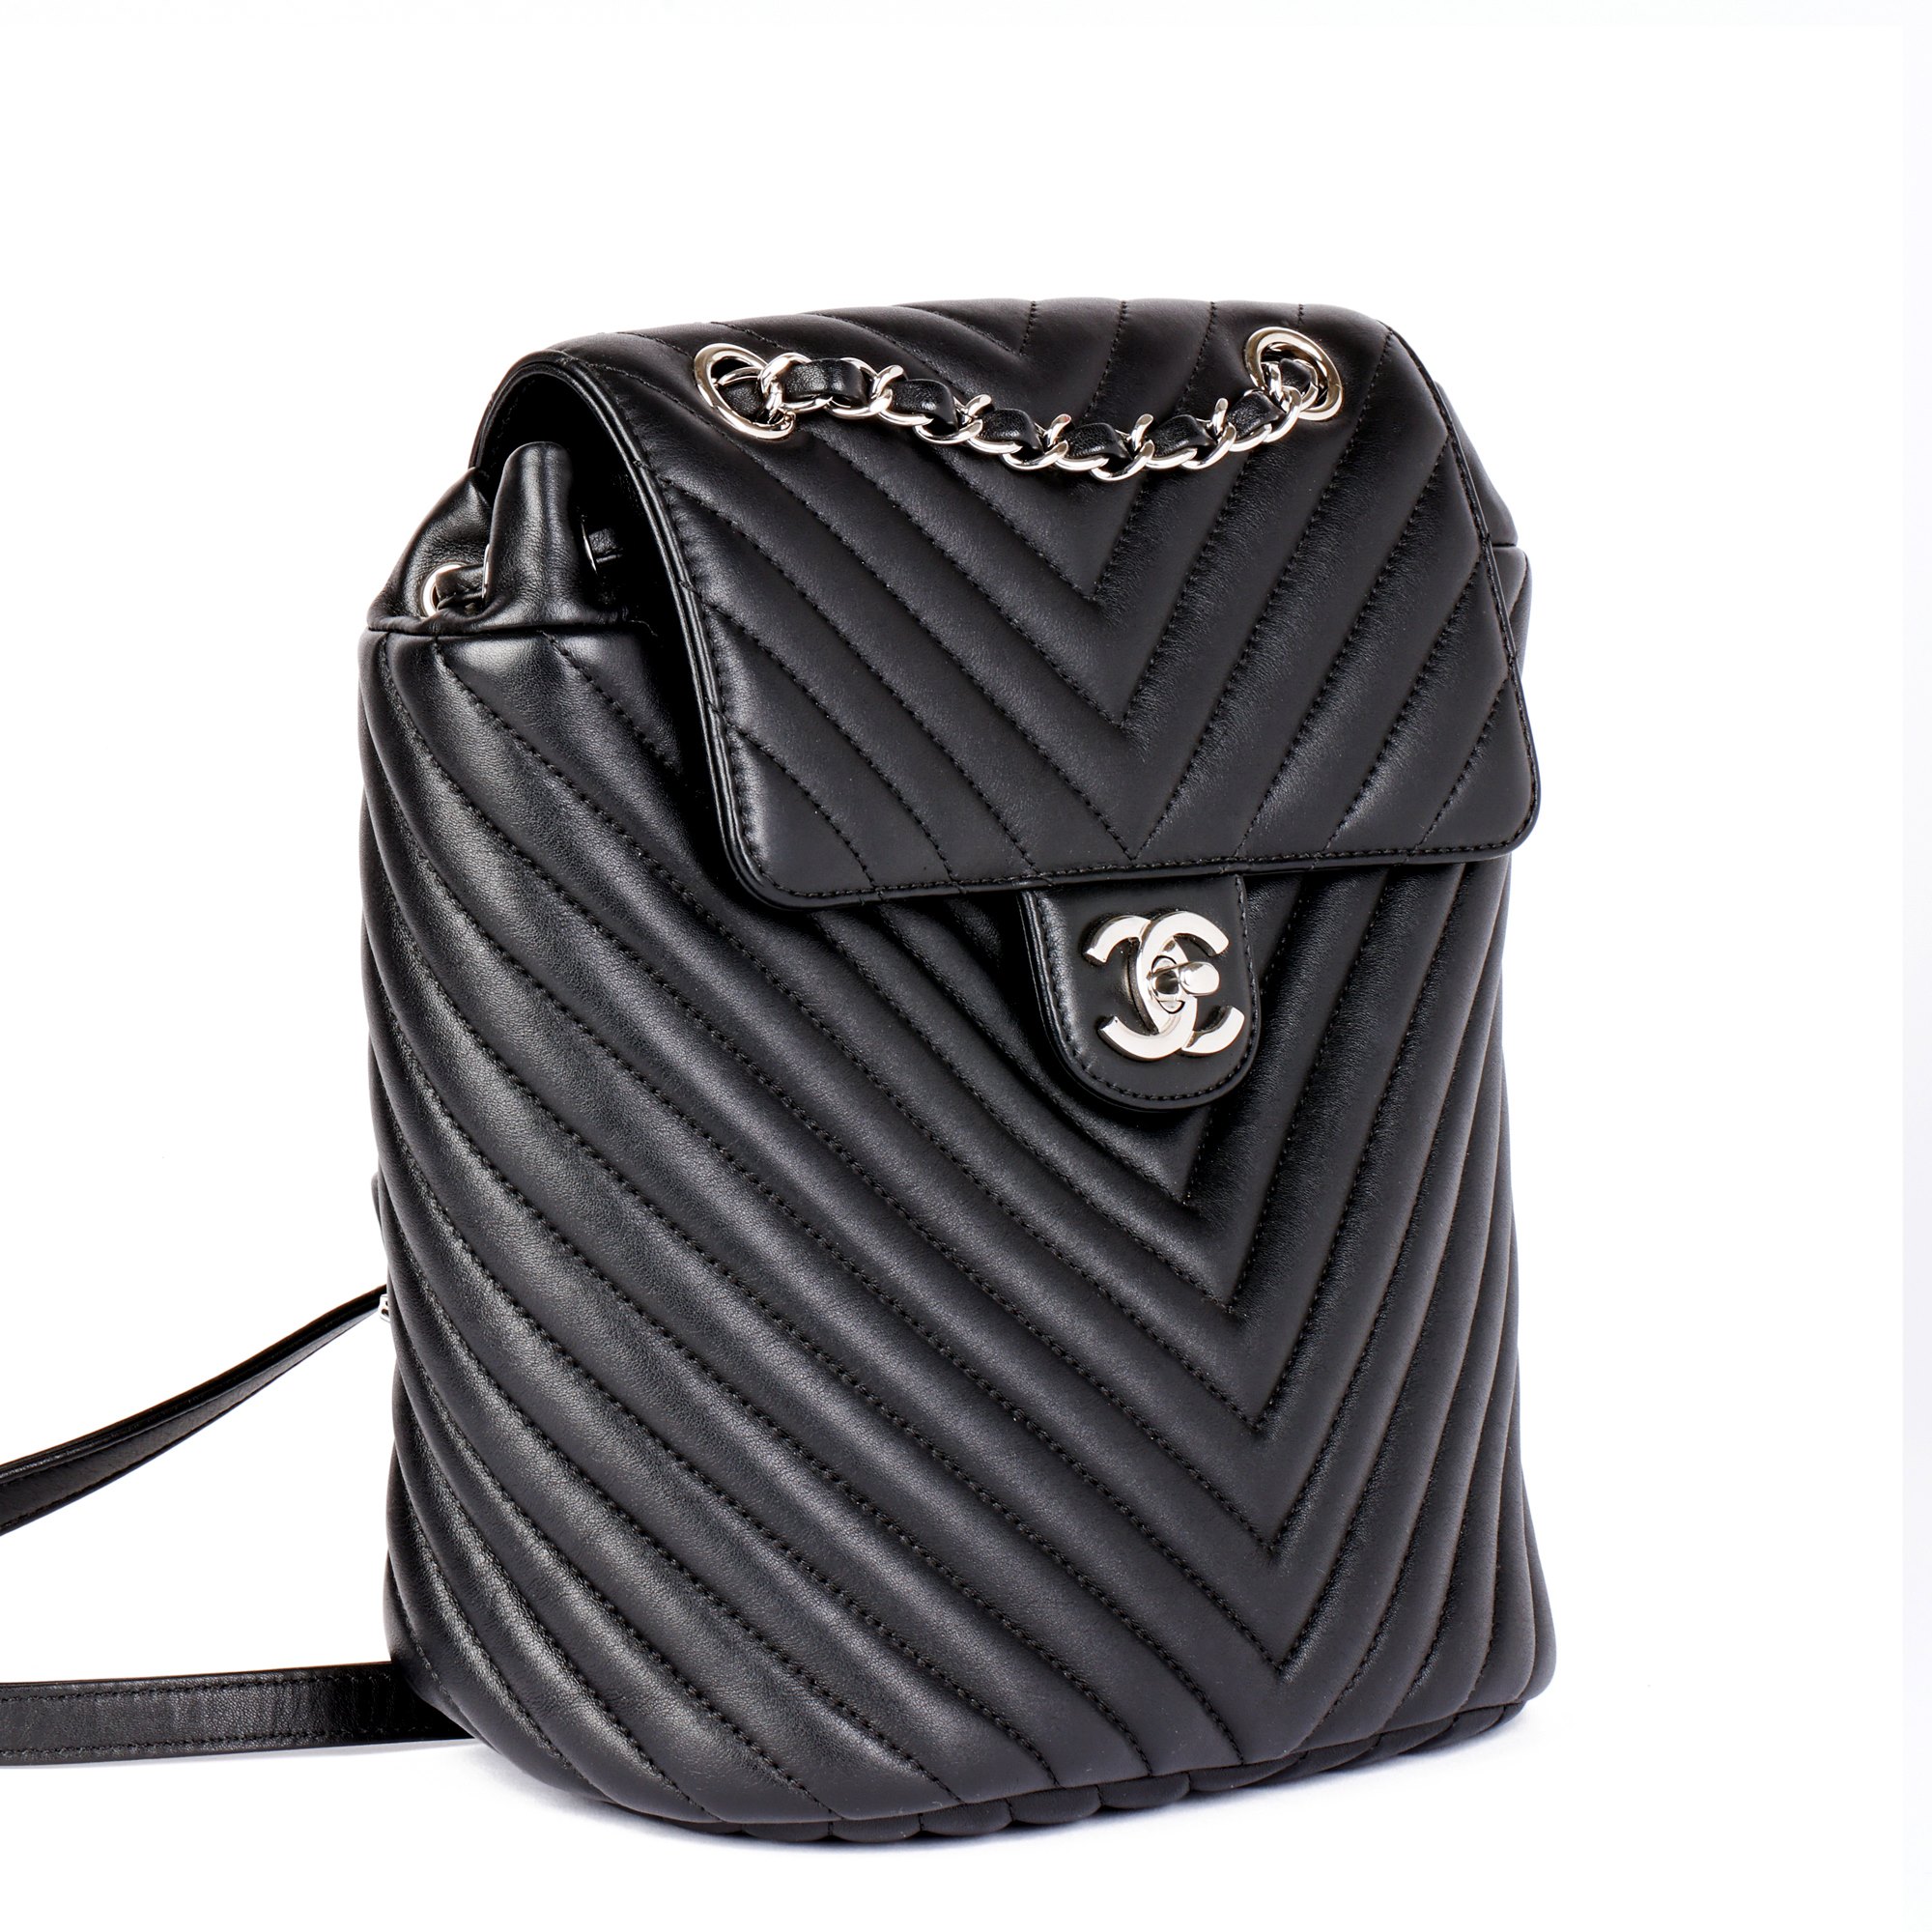 Chanel Black Chevron Quilted Lambskin Small Urban Spirit Backpack